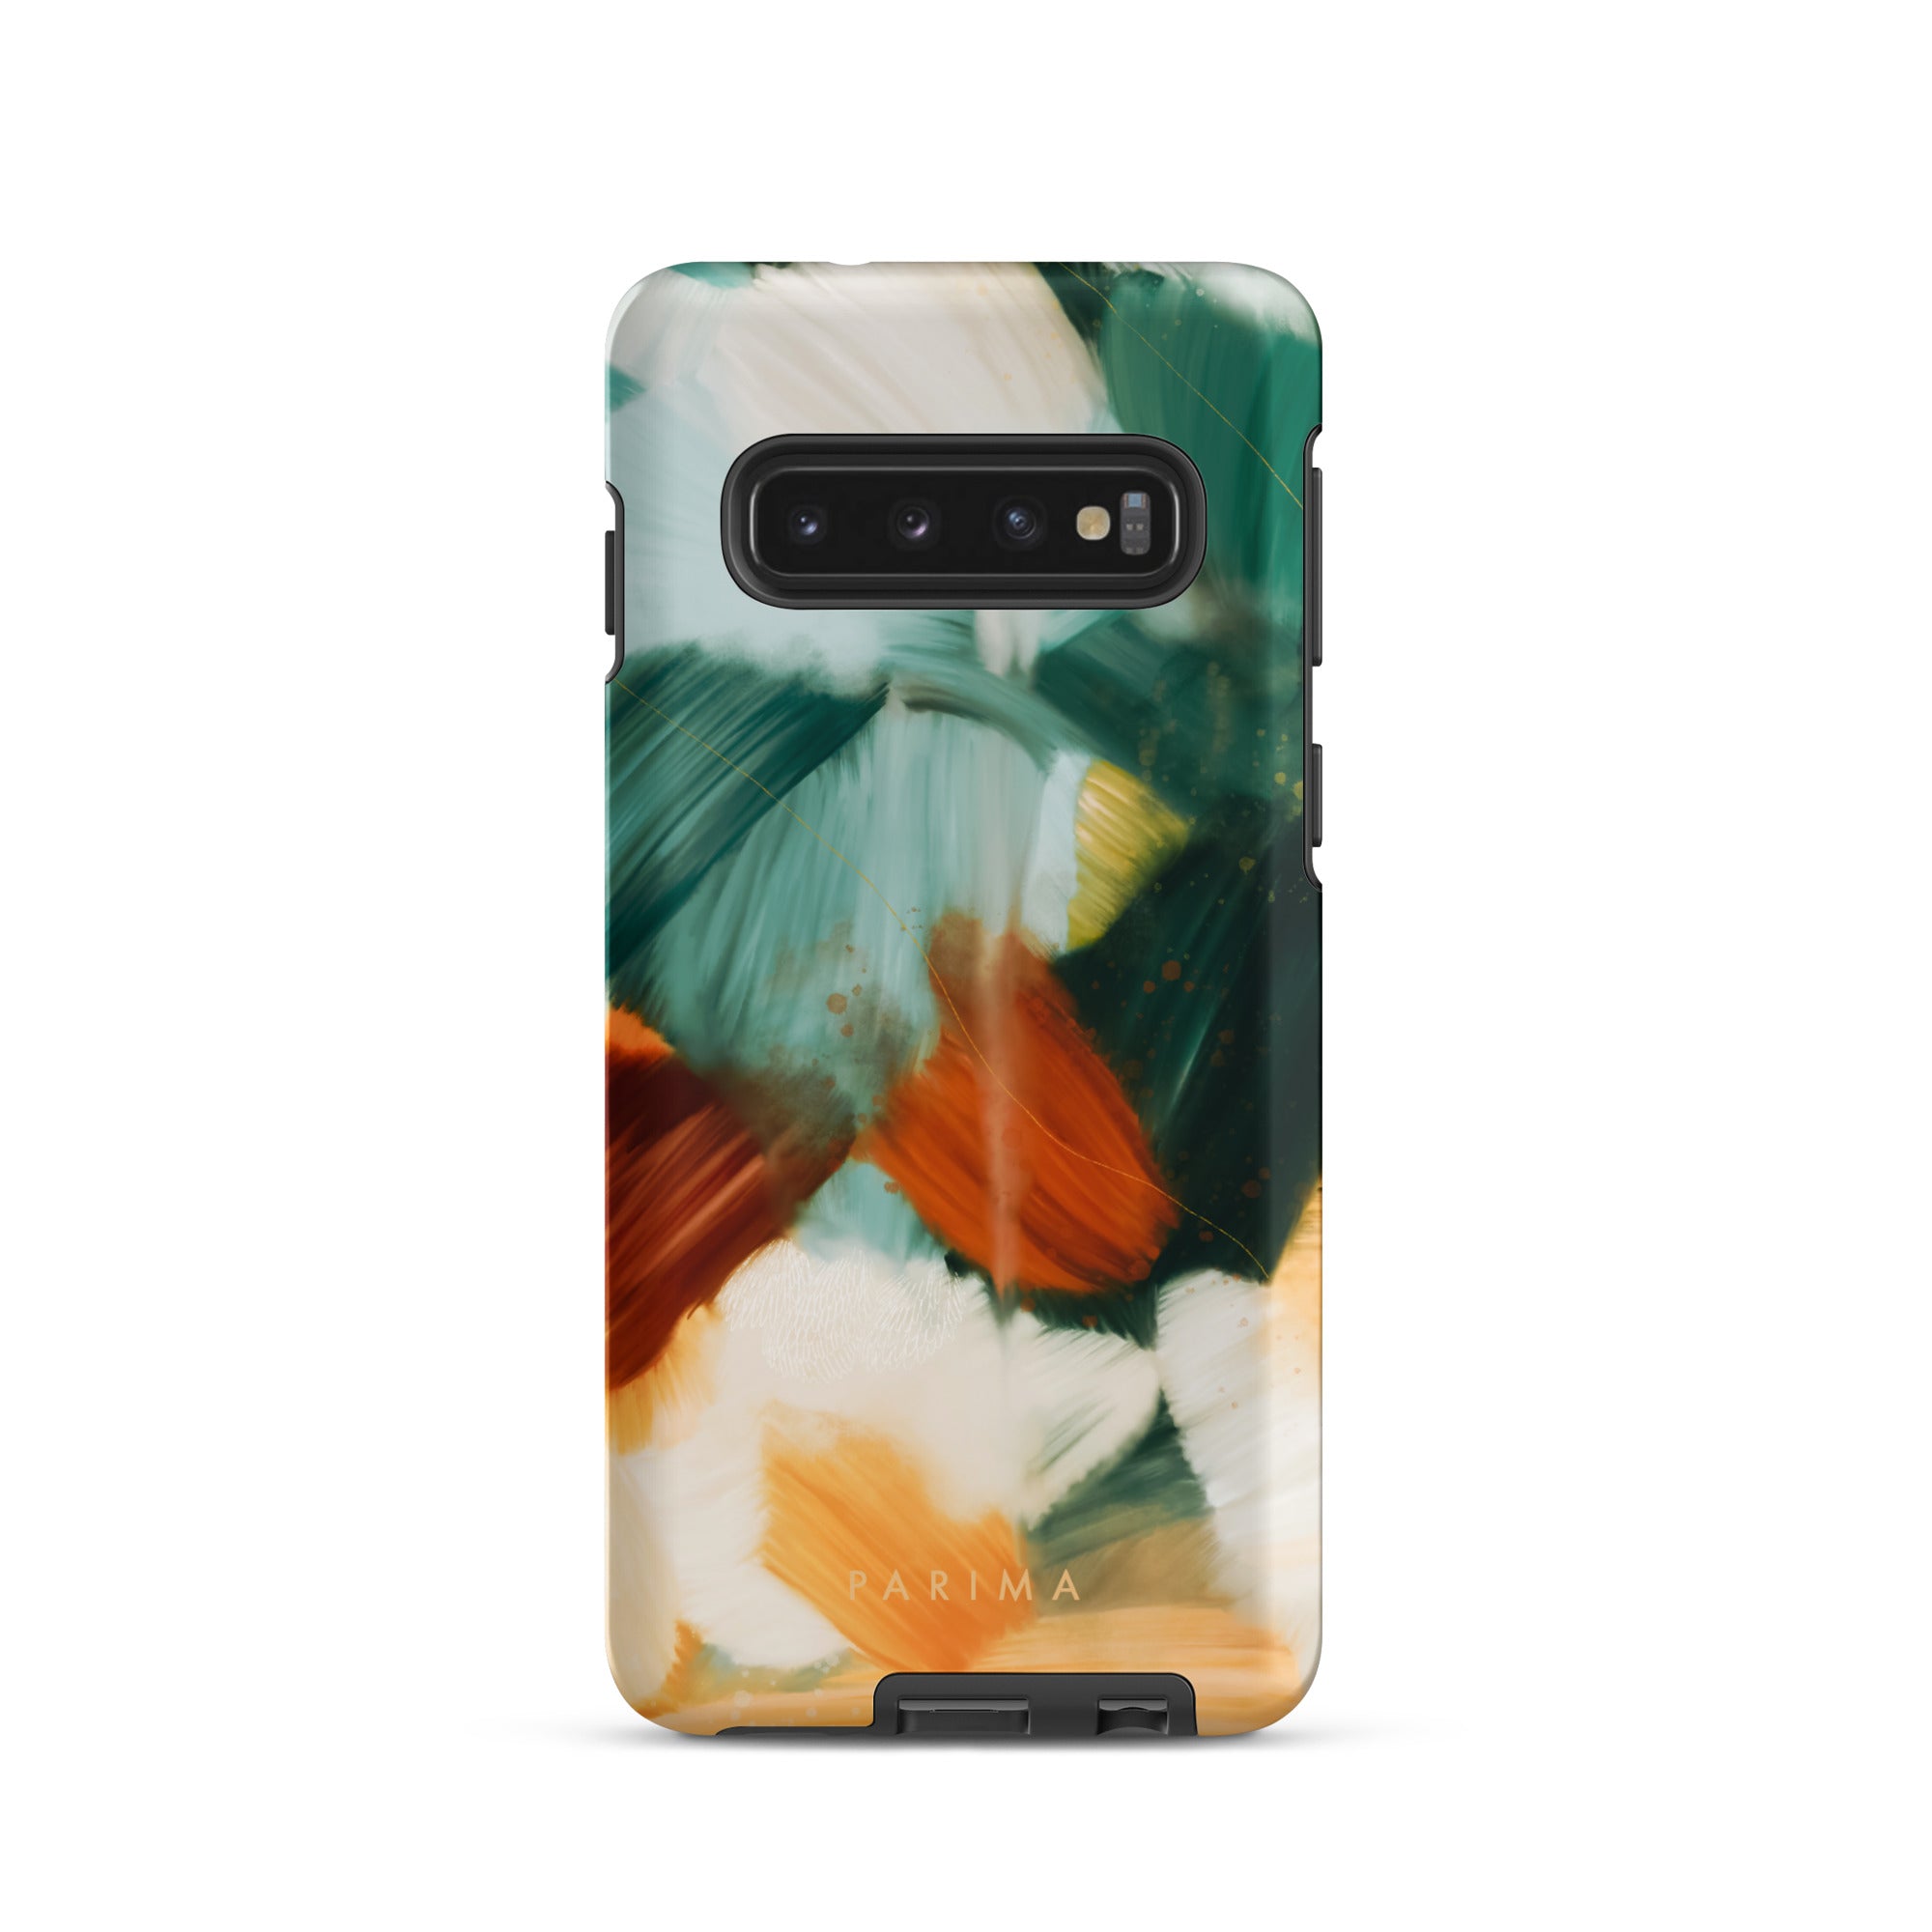 Meridian, green and orange abstract art on Samsung Galaxy S10 tough case by Parima Studio